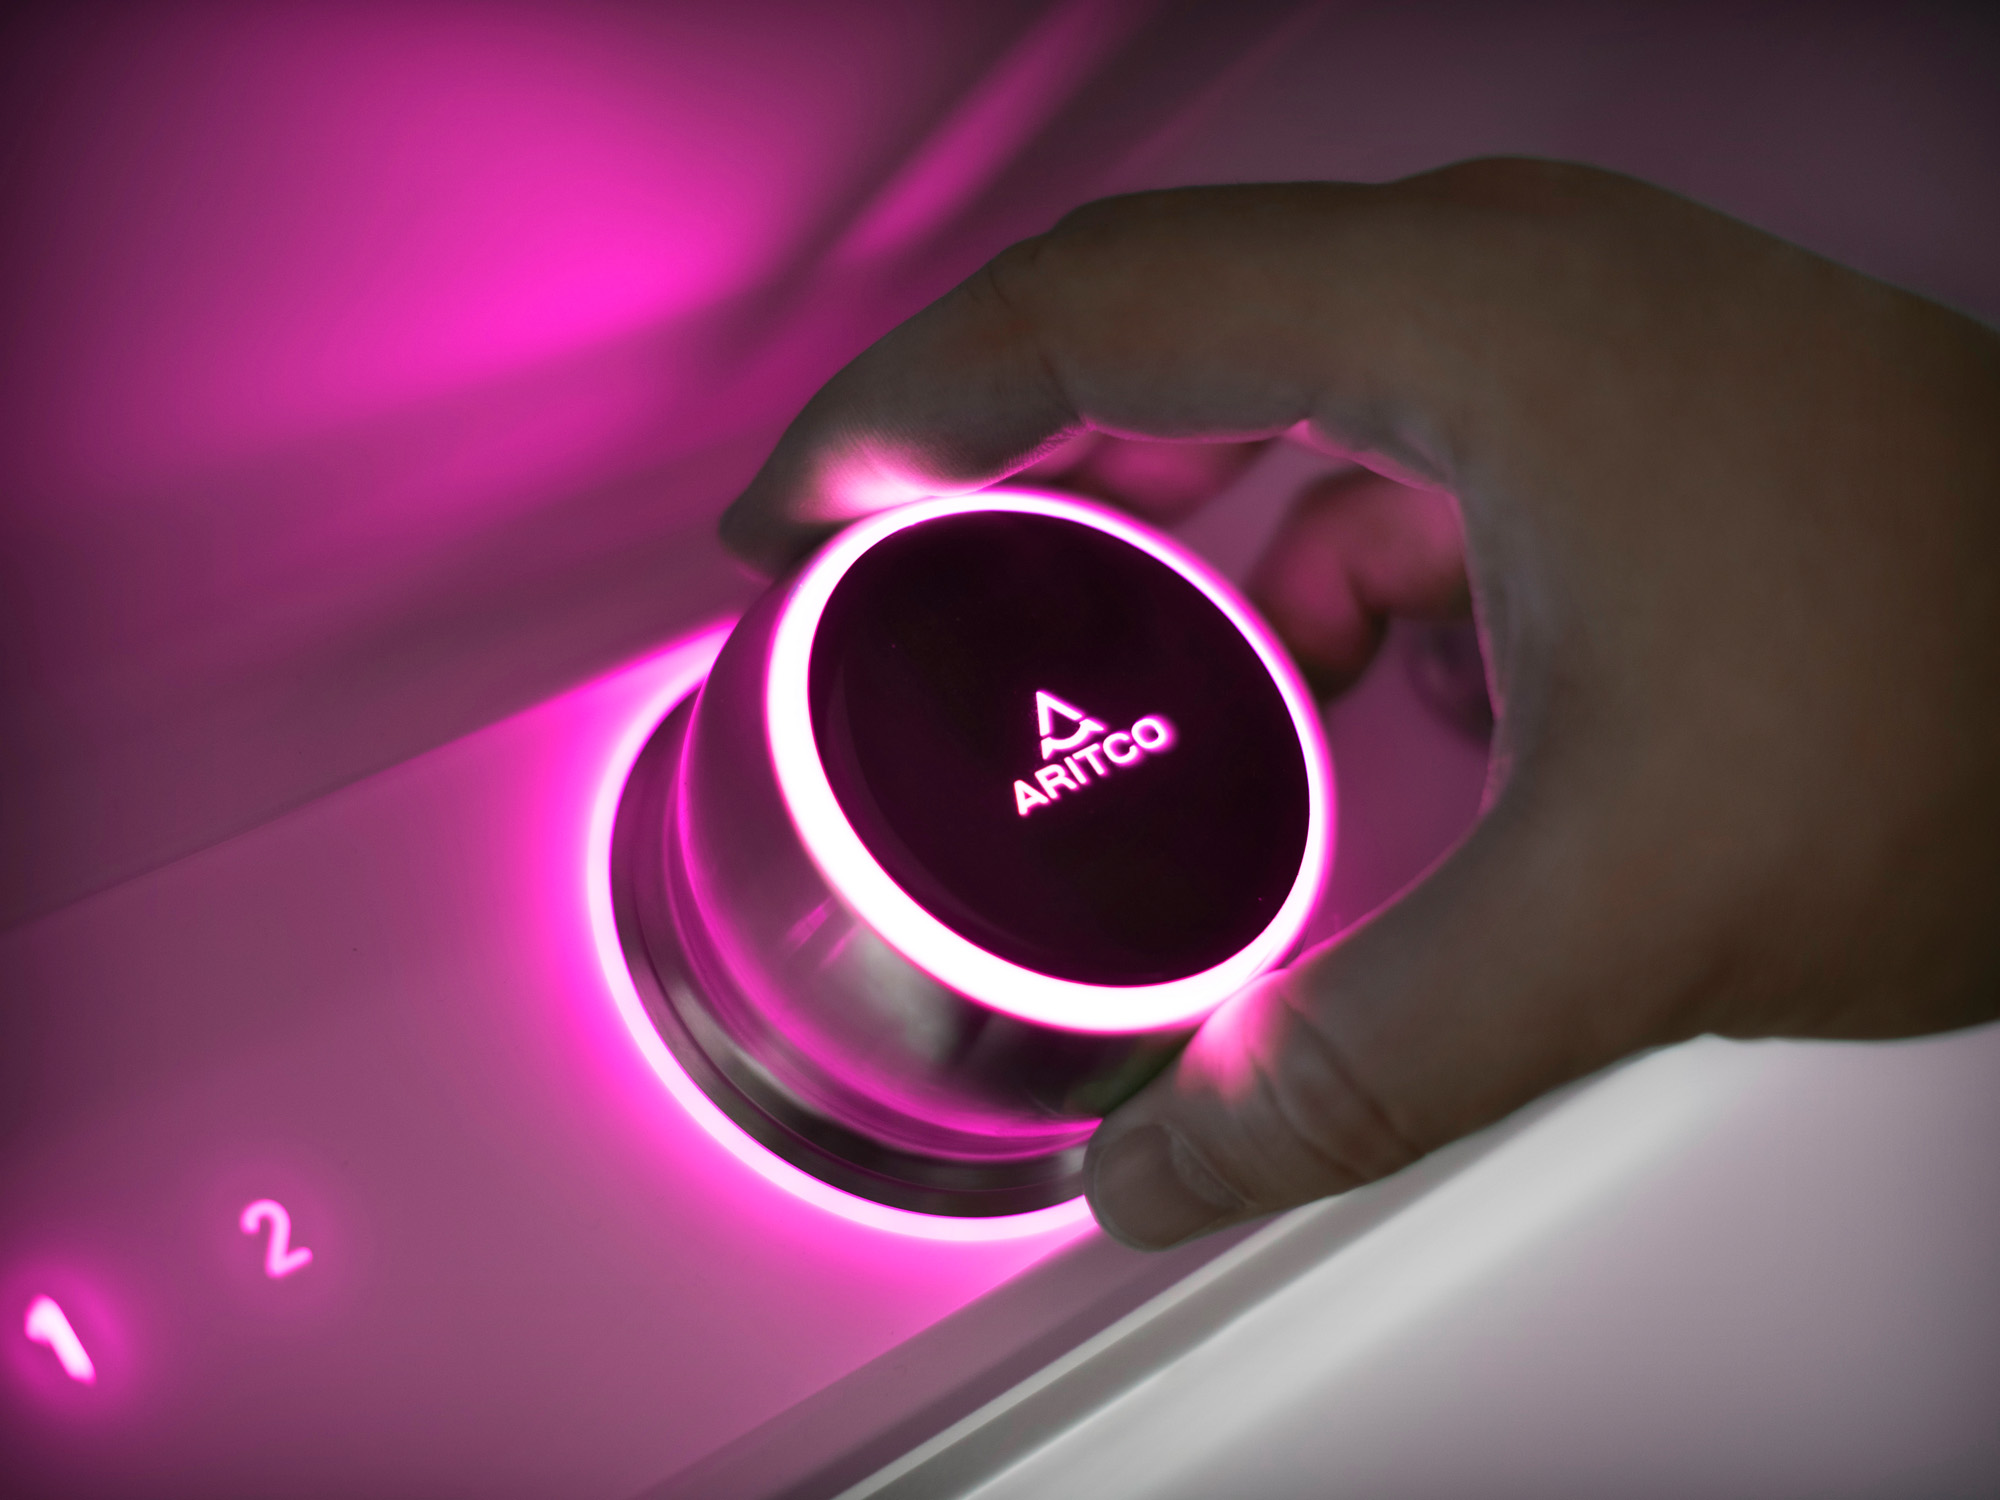 Aritco Smart Control for the home lift, lighting up in pink